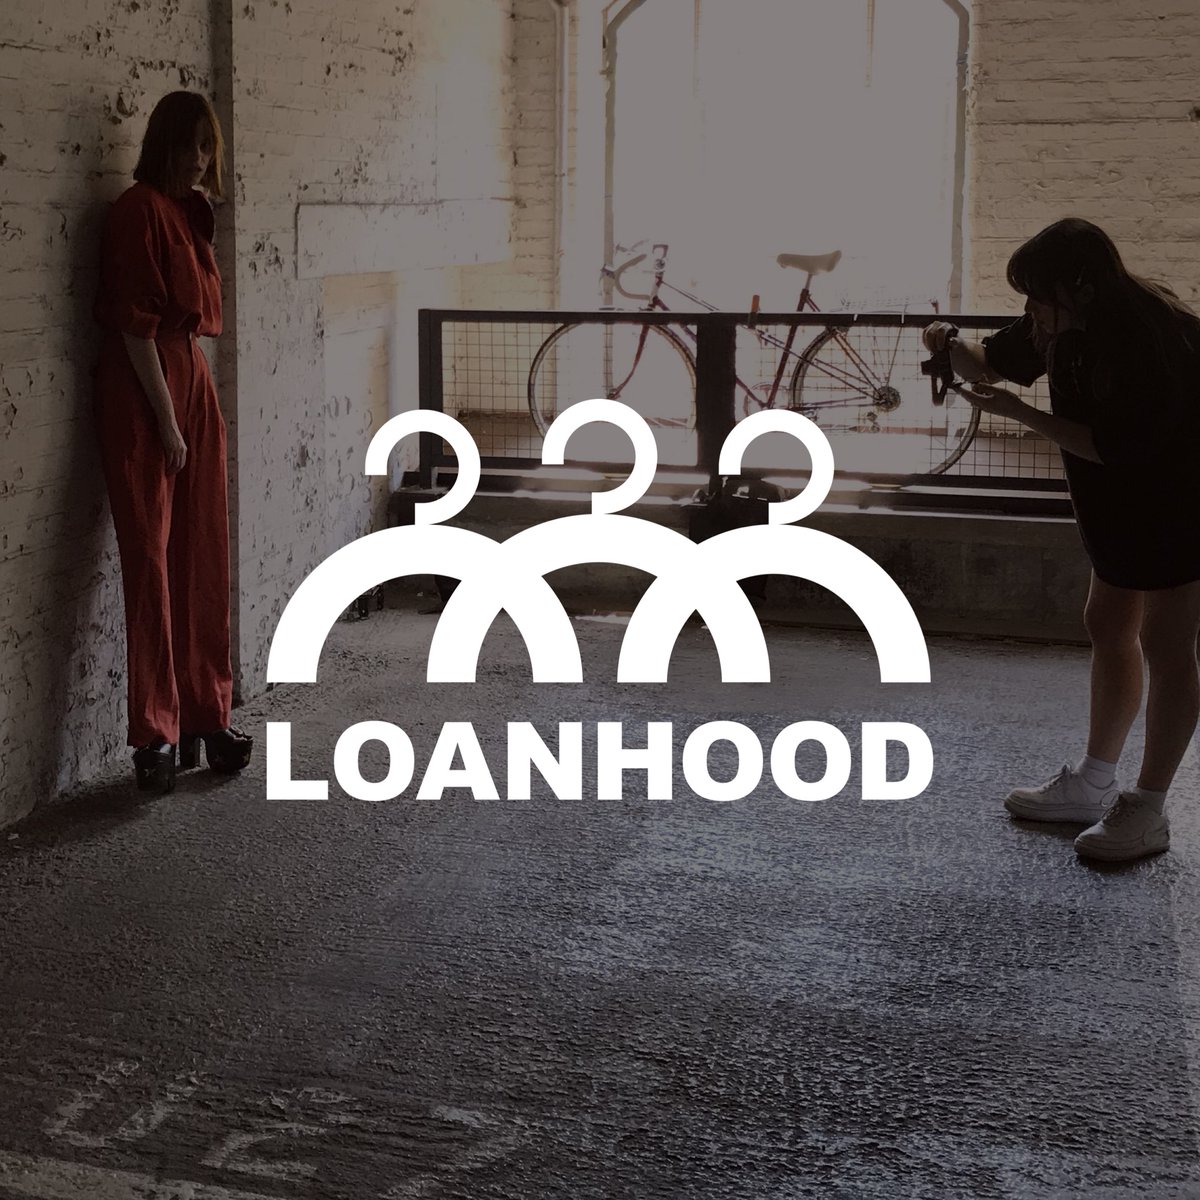 TOO MANY CLOTHES BUT NOTHING TO WEAR?
That’s why we’re building LOANHOOD - your fashion rental community. Head to our Crowdfunder and check out our rewards bit.ly/loanhood #fashionrental #rentalrevolution